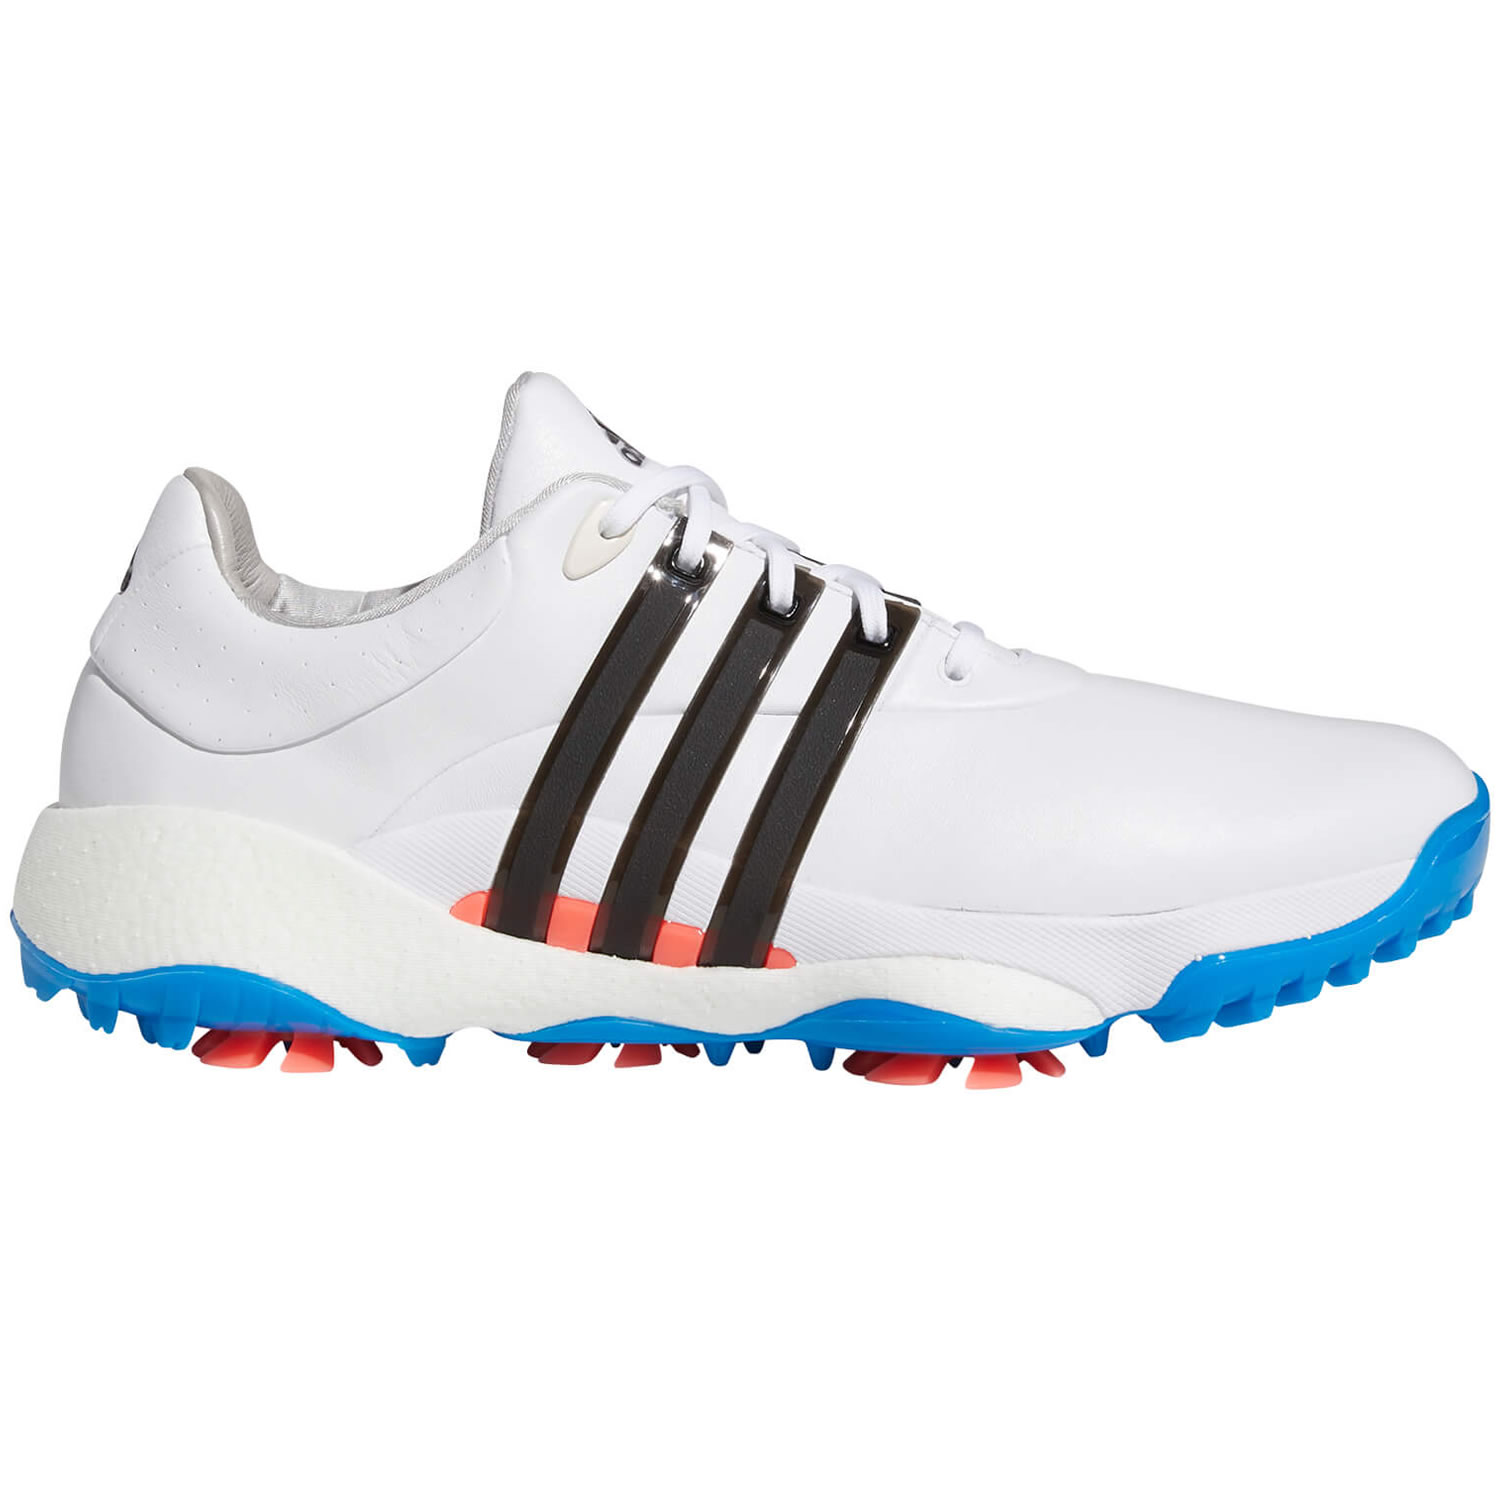 adidas tour 360 blisters